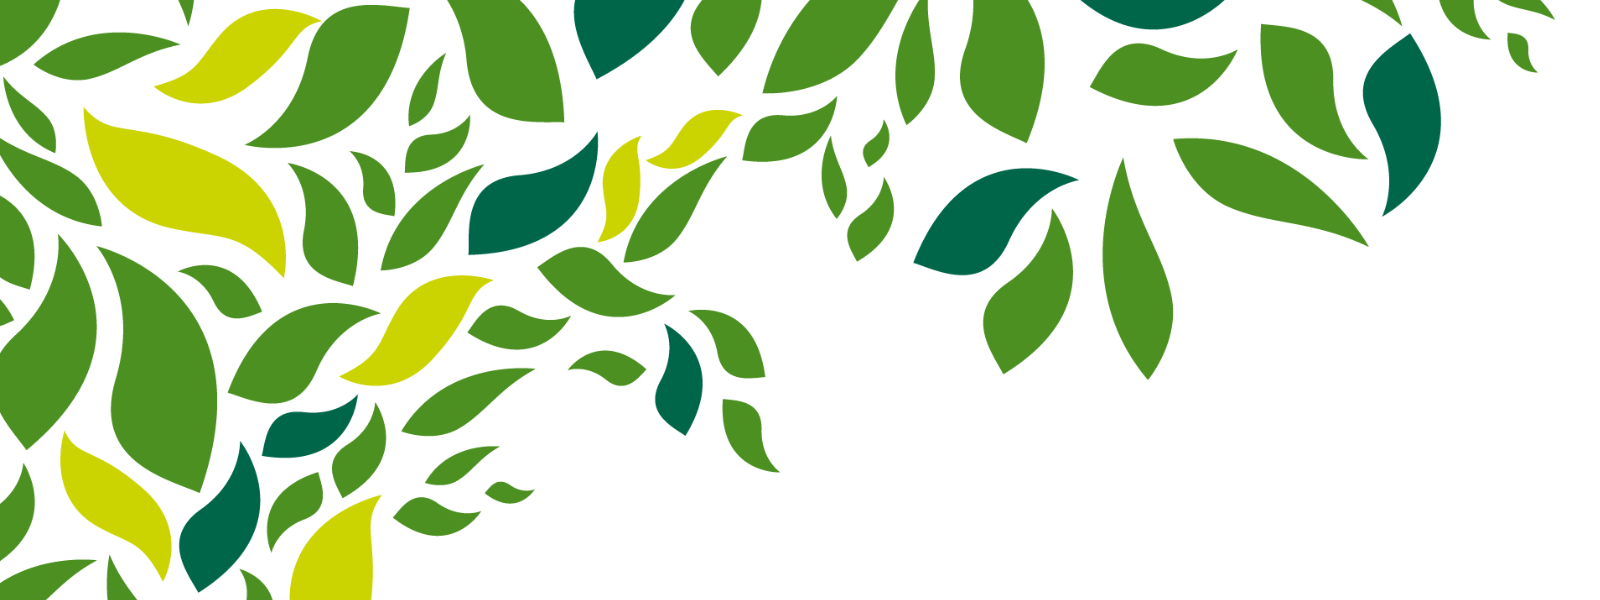 A graphic of green leaves